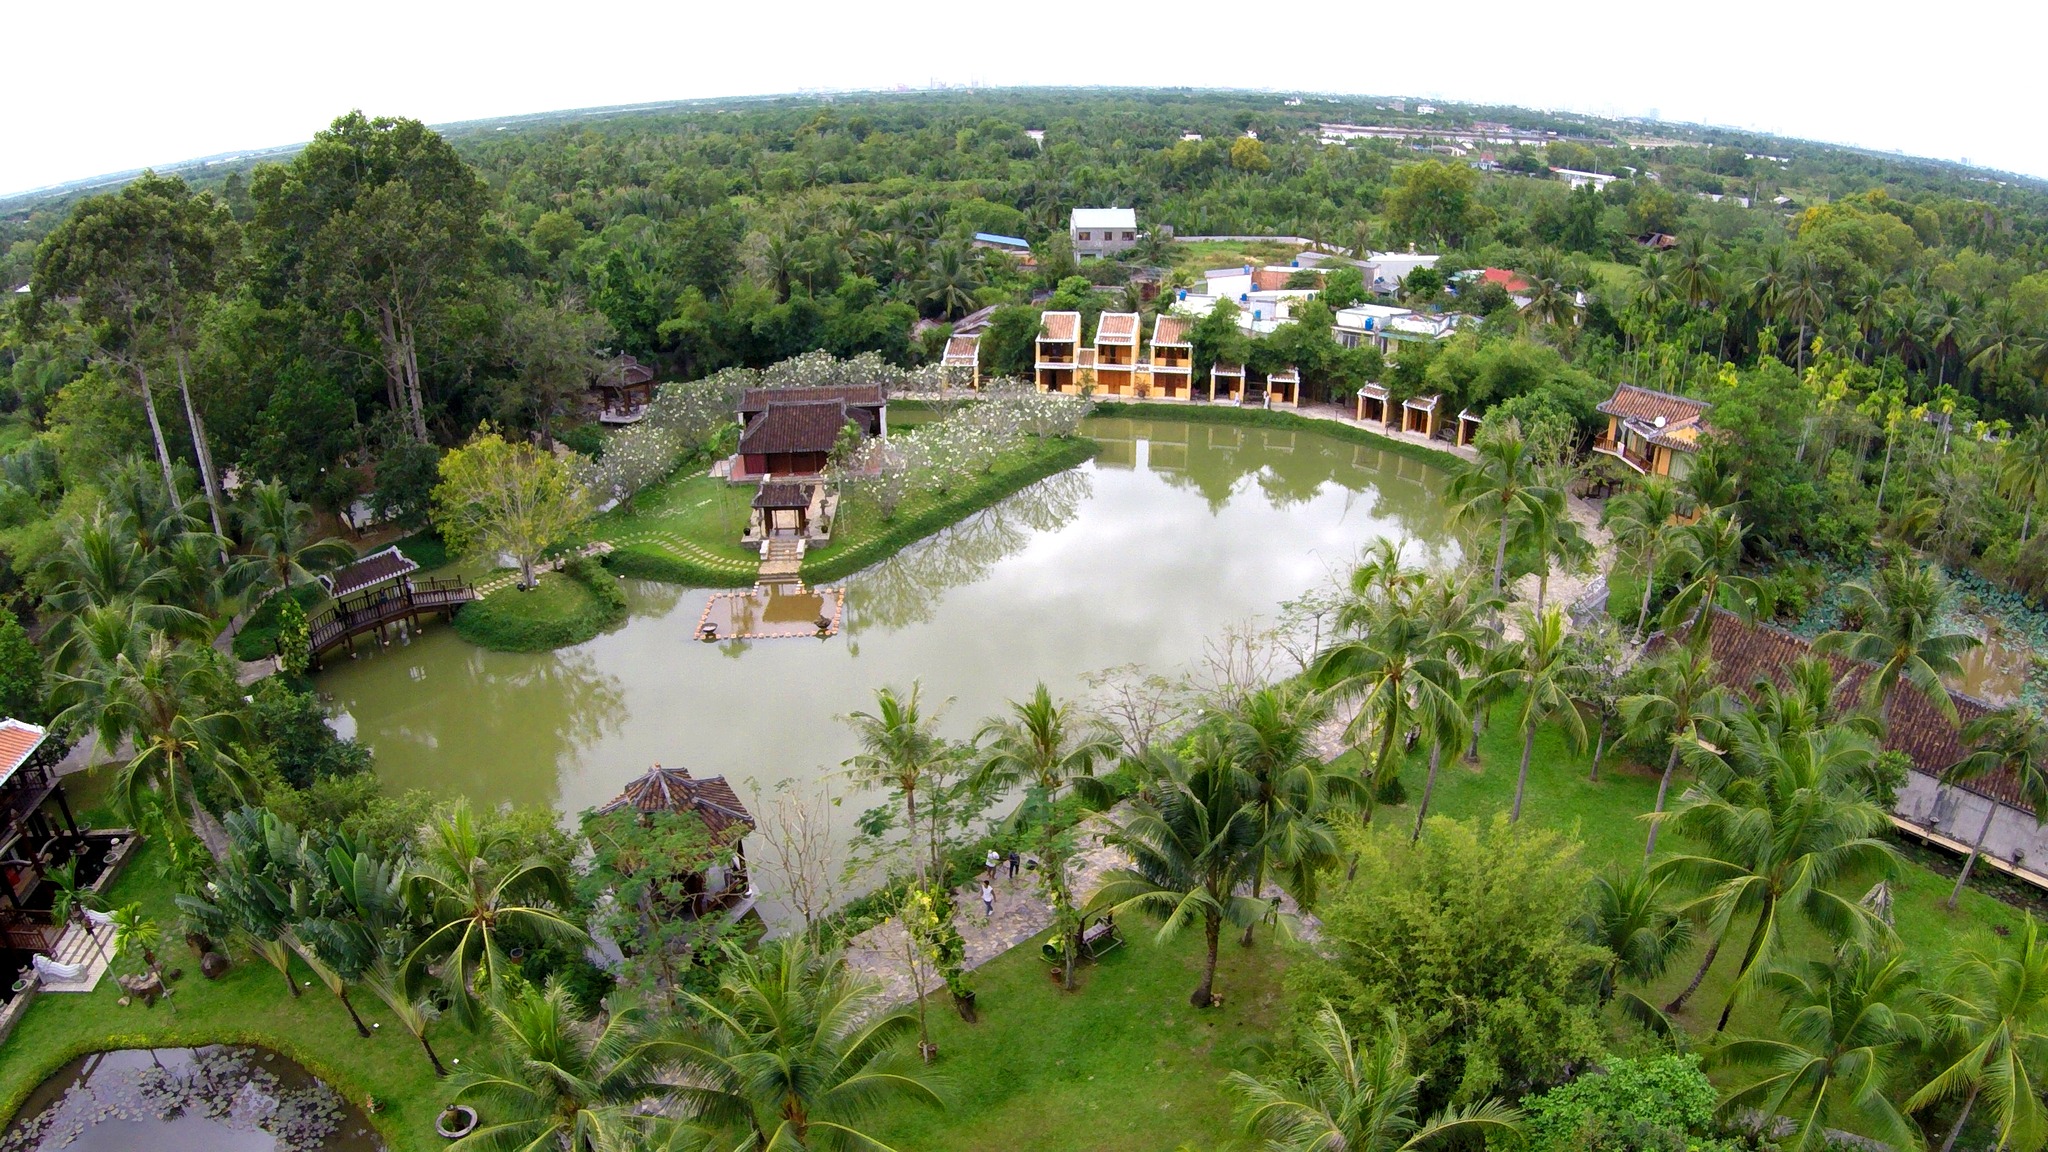 A panoramic view of the Ao Dai Museum campus, which spans ​​20,000 hectares and is surrounded by the Tac River and the Dong Nai River. Photo courtesy of the Ao Dai Museum